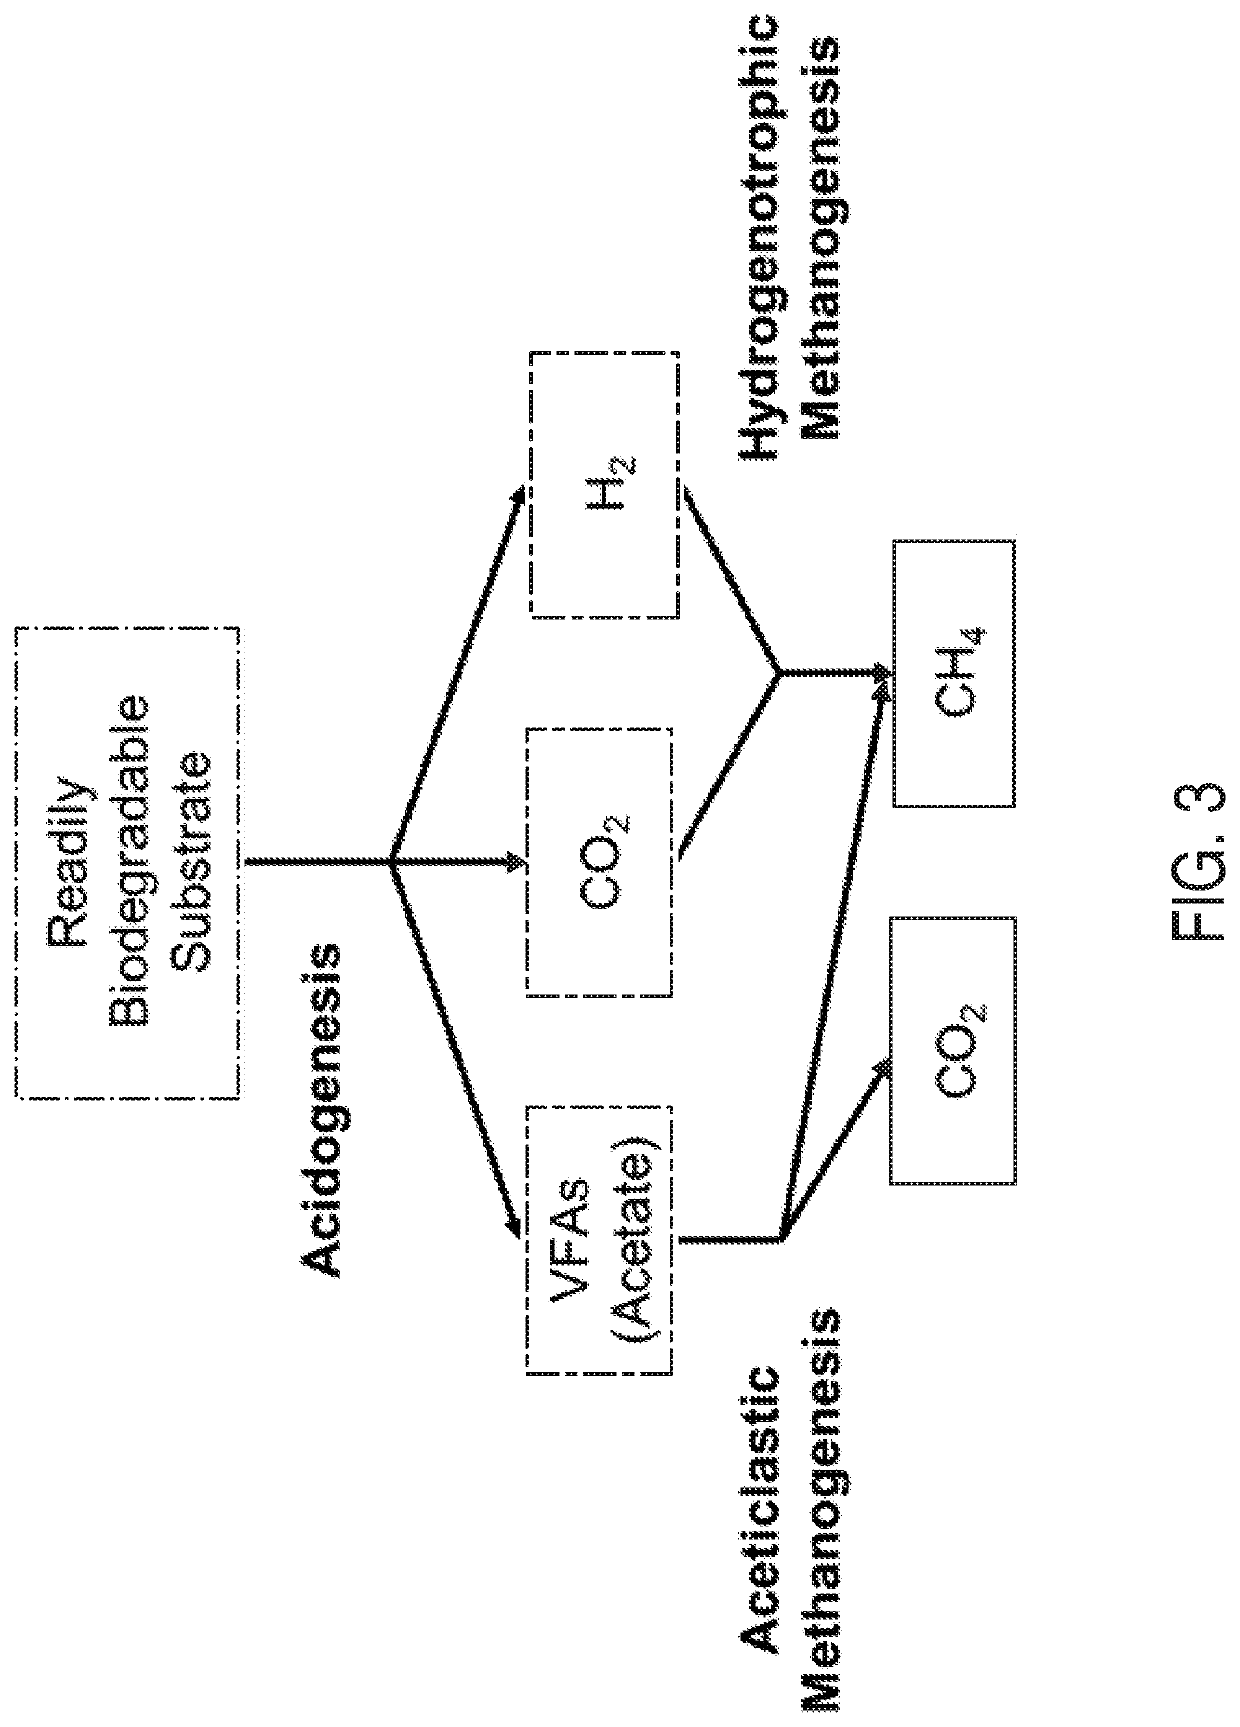 Automatic start-up of anaerobic digestion reactors using model predictive control and practically feasible sets of measurements